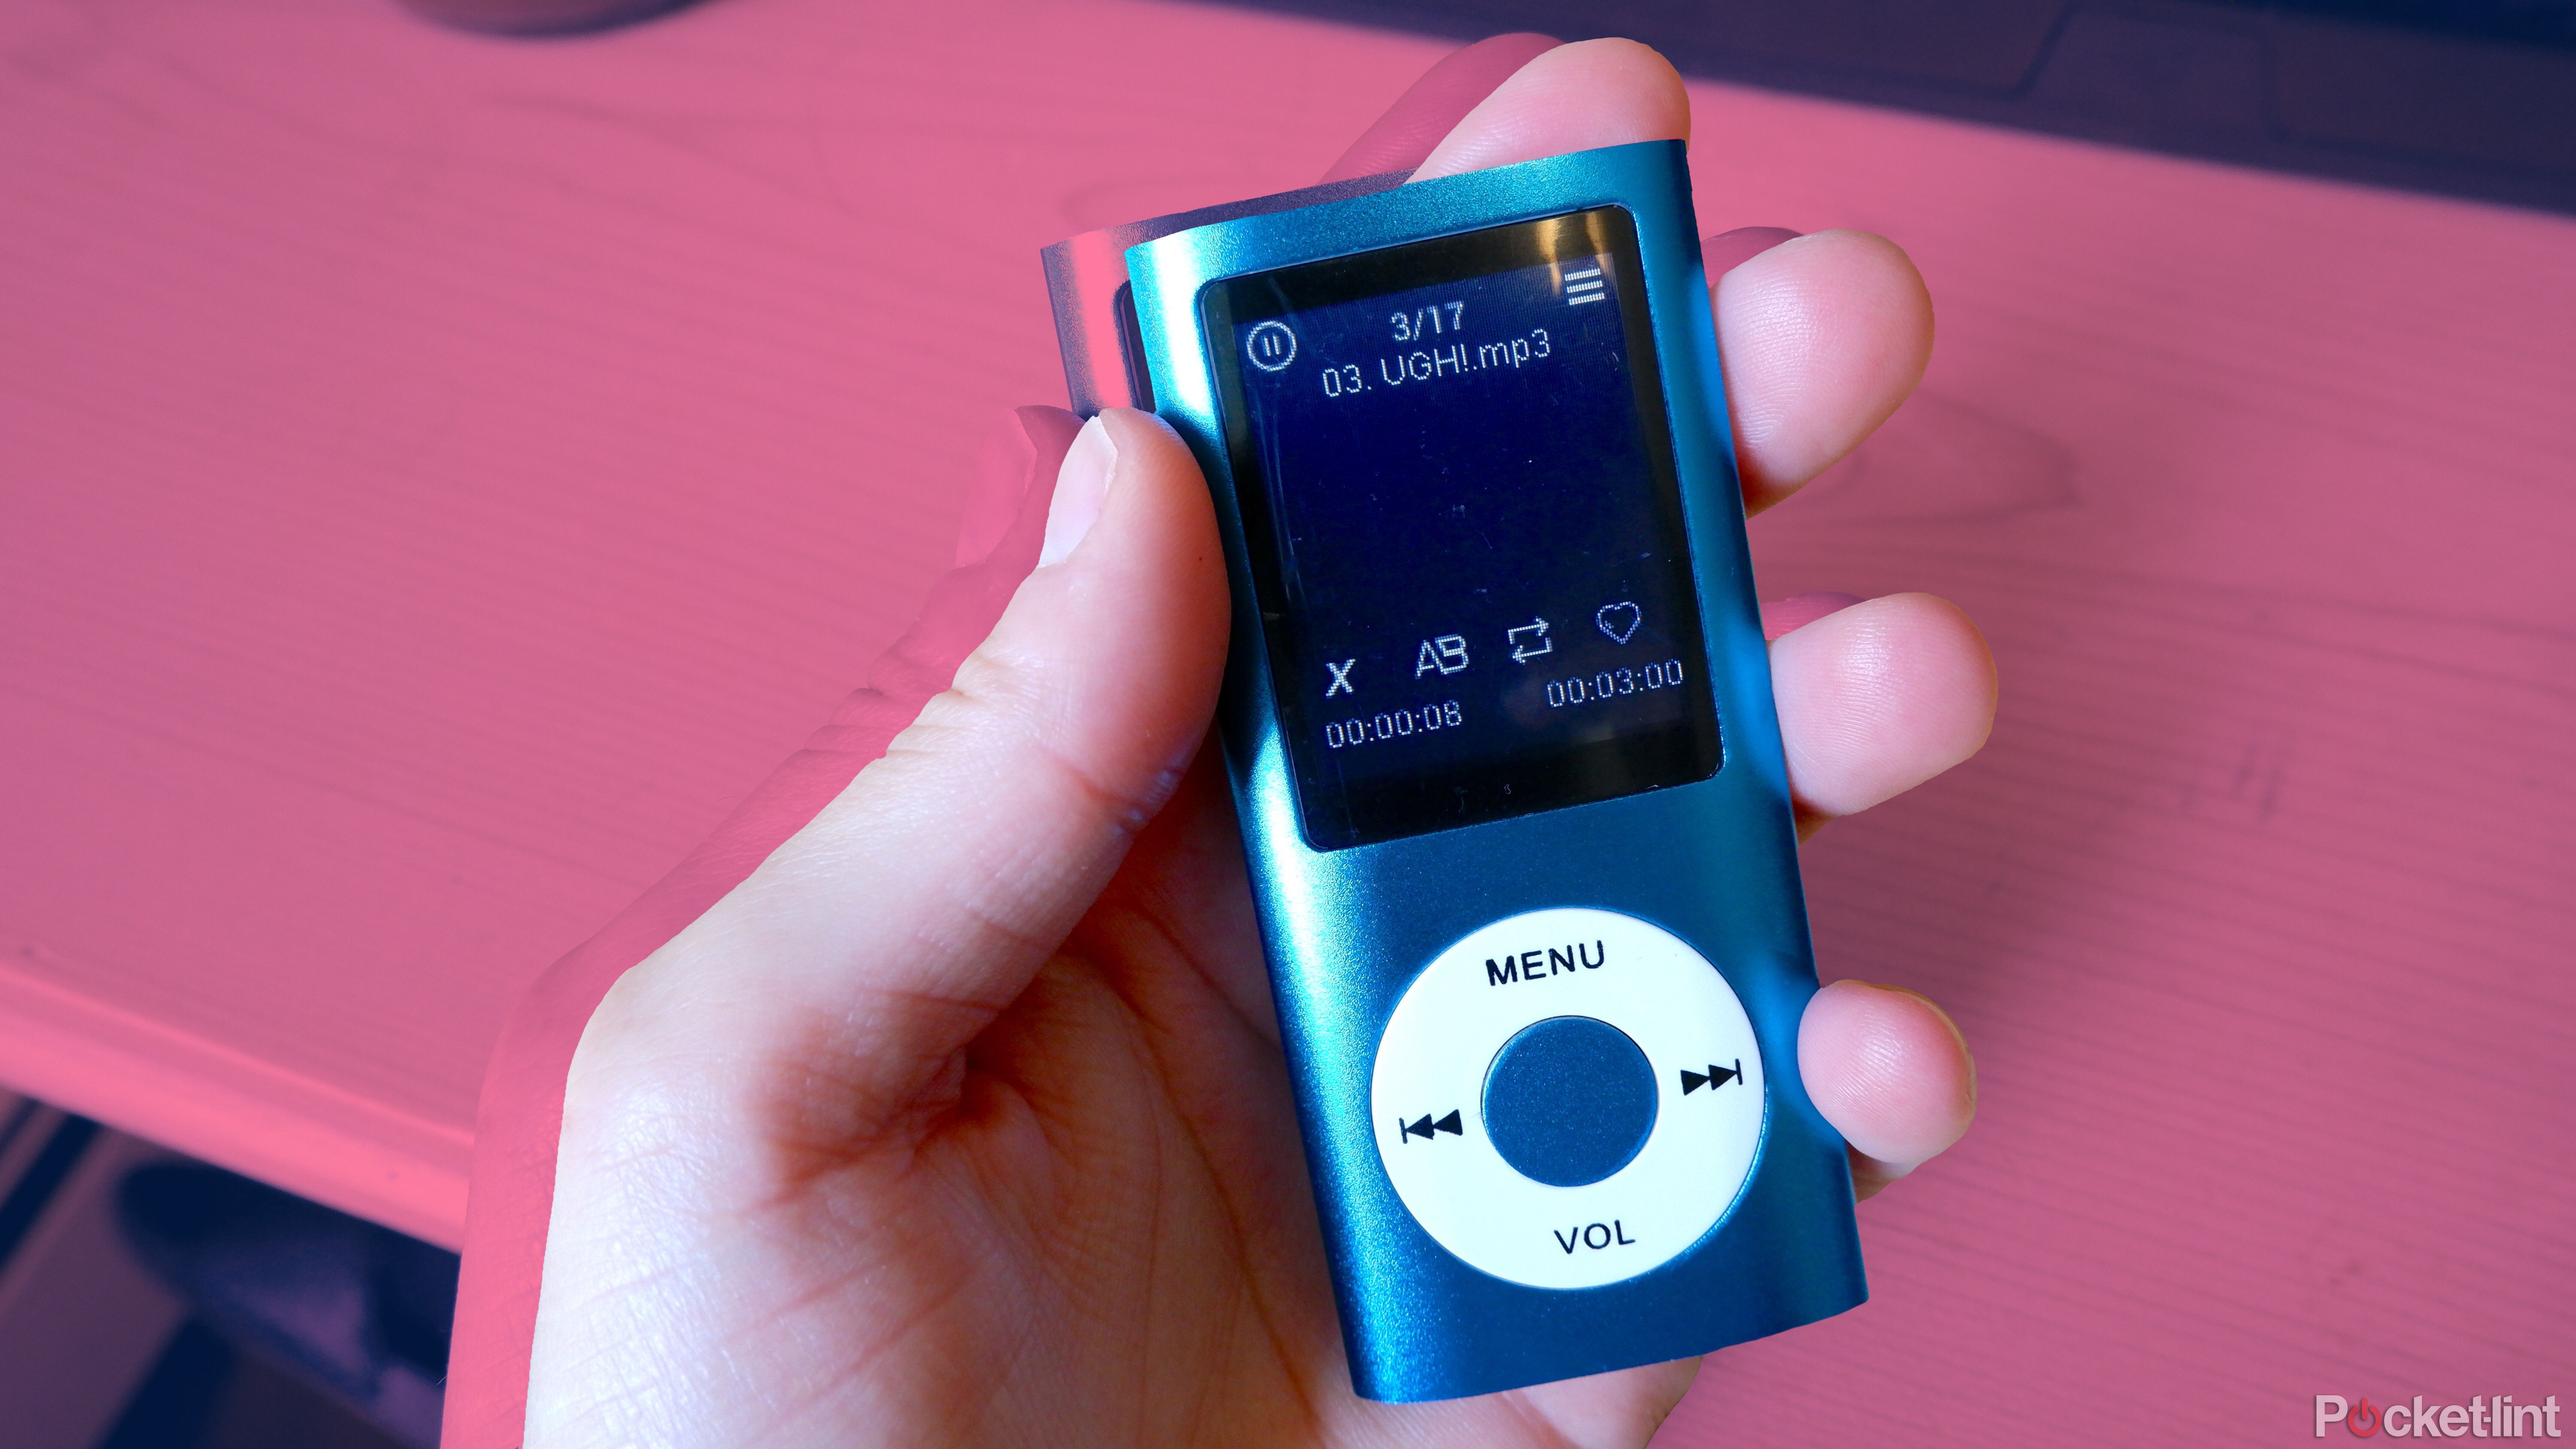 A hand holding a blue Luqeeg MP3 player